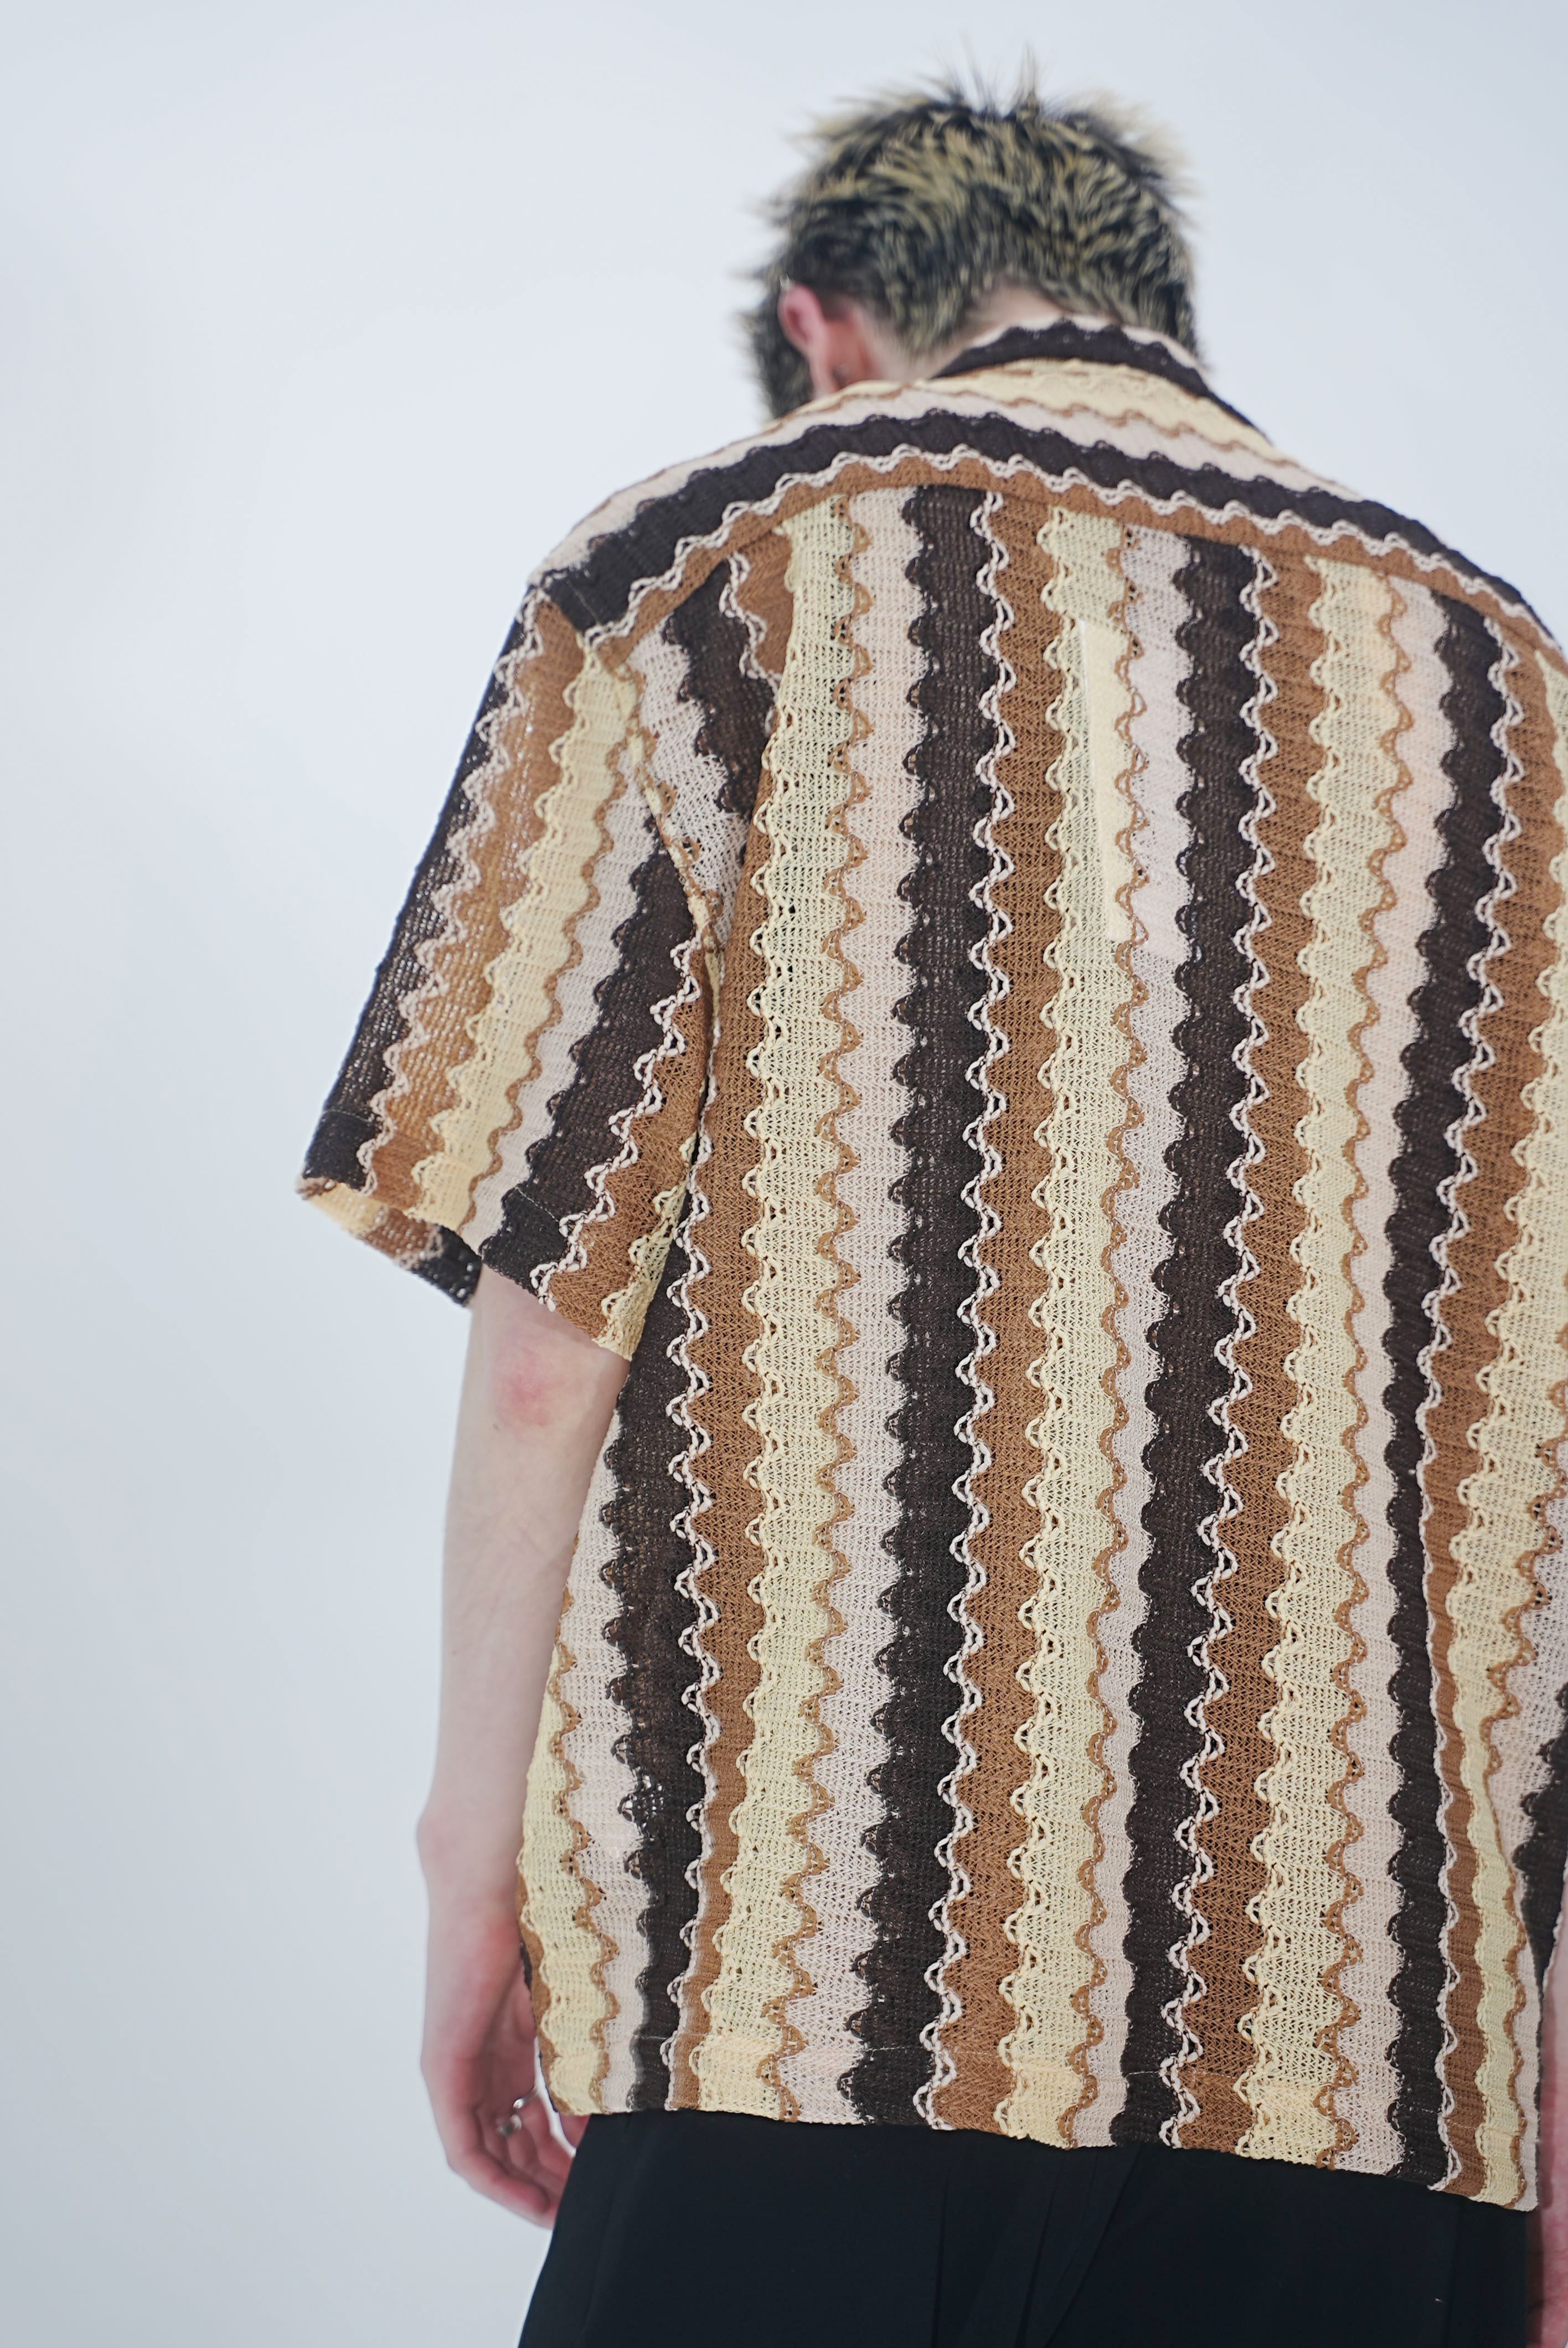 CMMN SWDN SS23 TURE KNITTED SHIRT BROWN WAVE